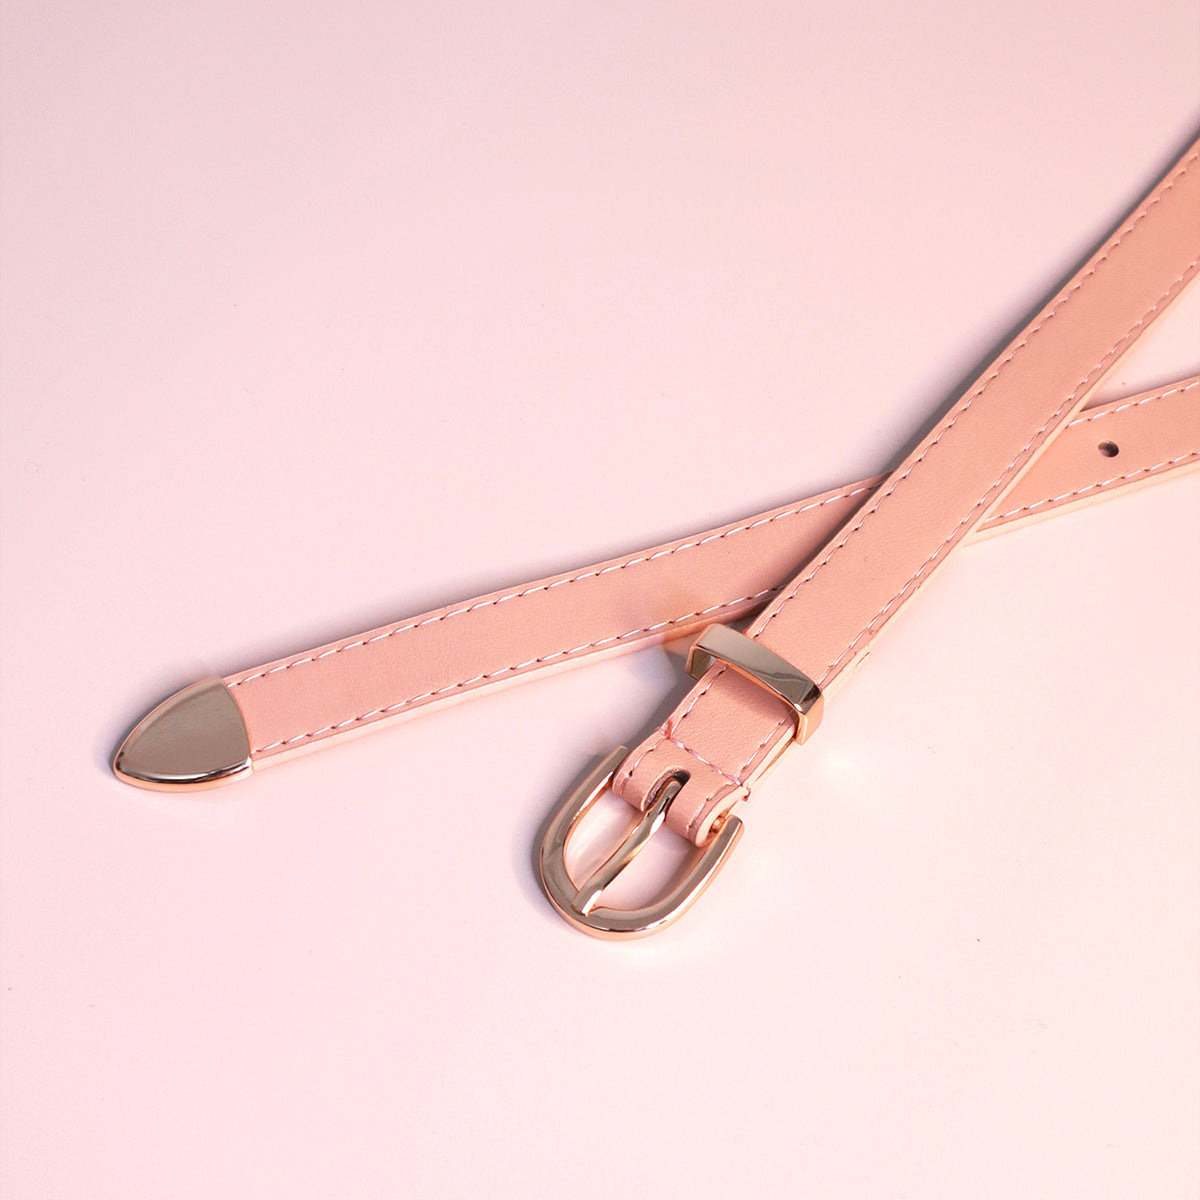 Beige With Gold Tone Thin Belt